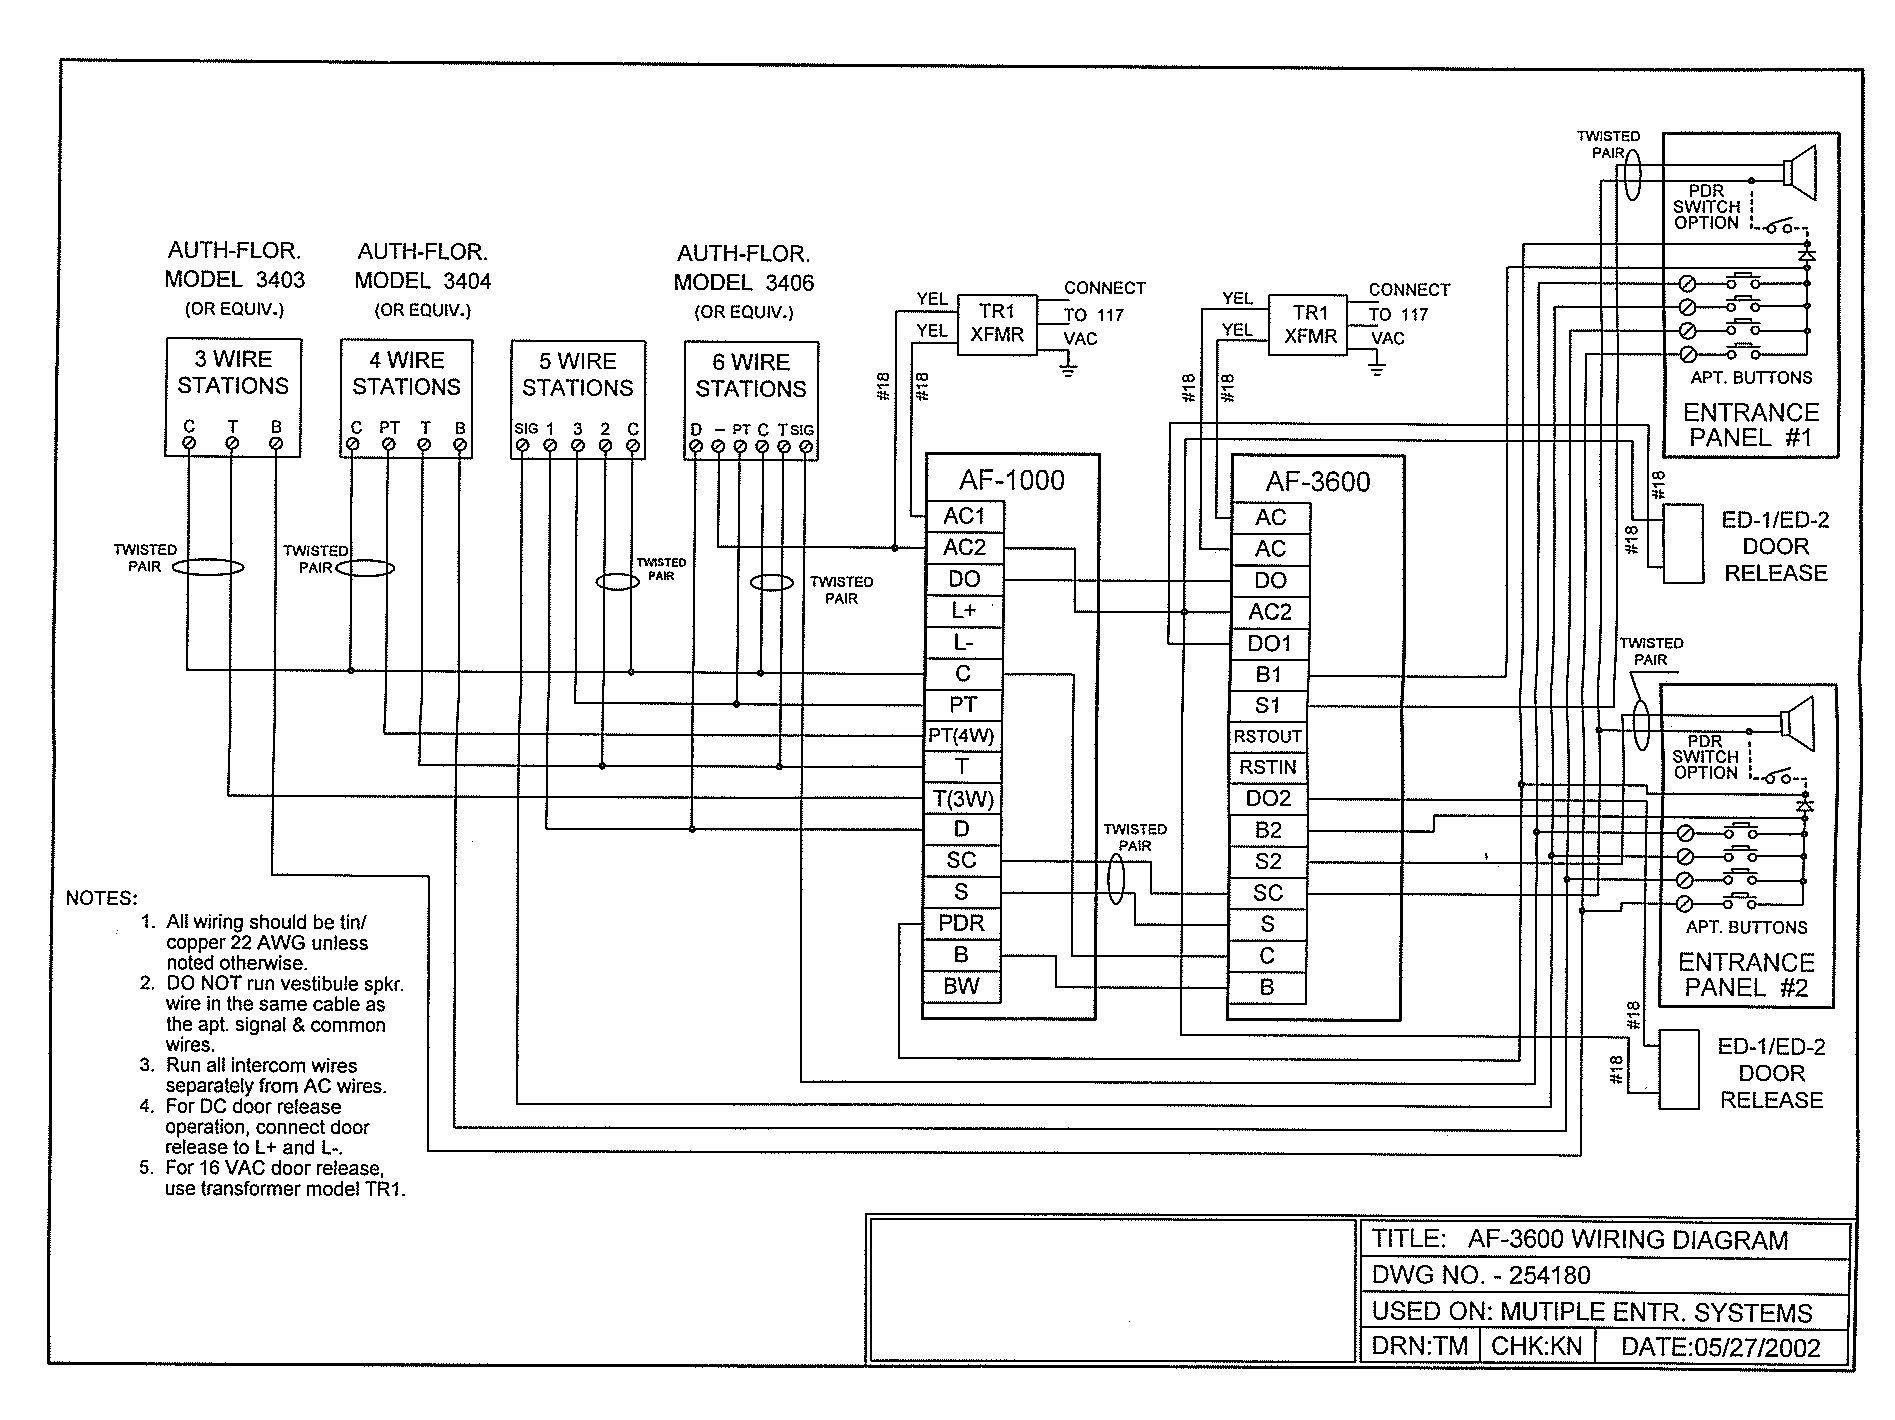 pacific diagram with intercom wiring softcomm description stunning atc image ideas